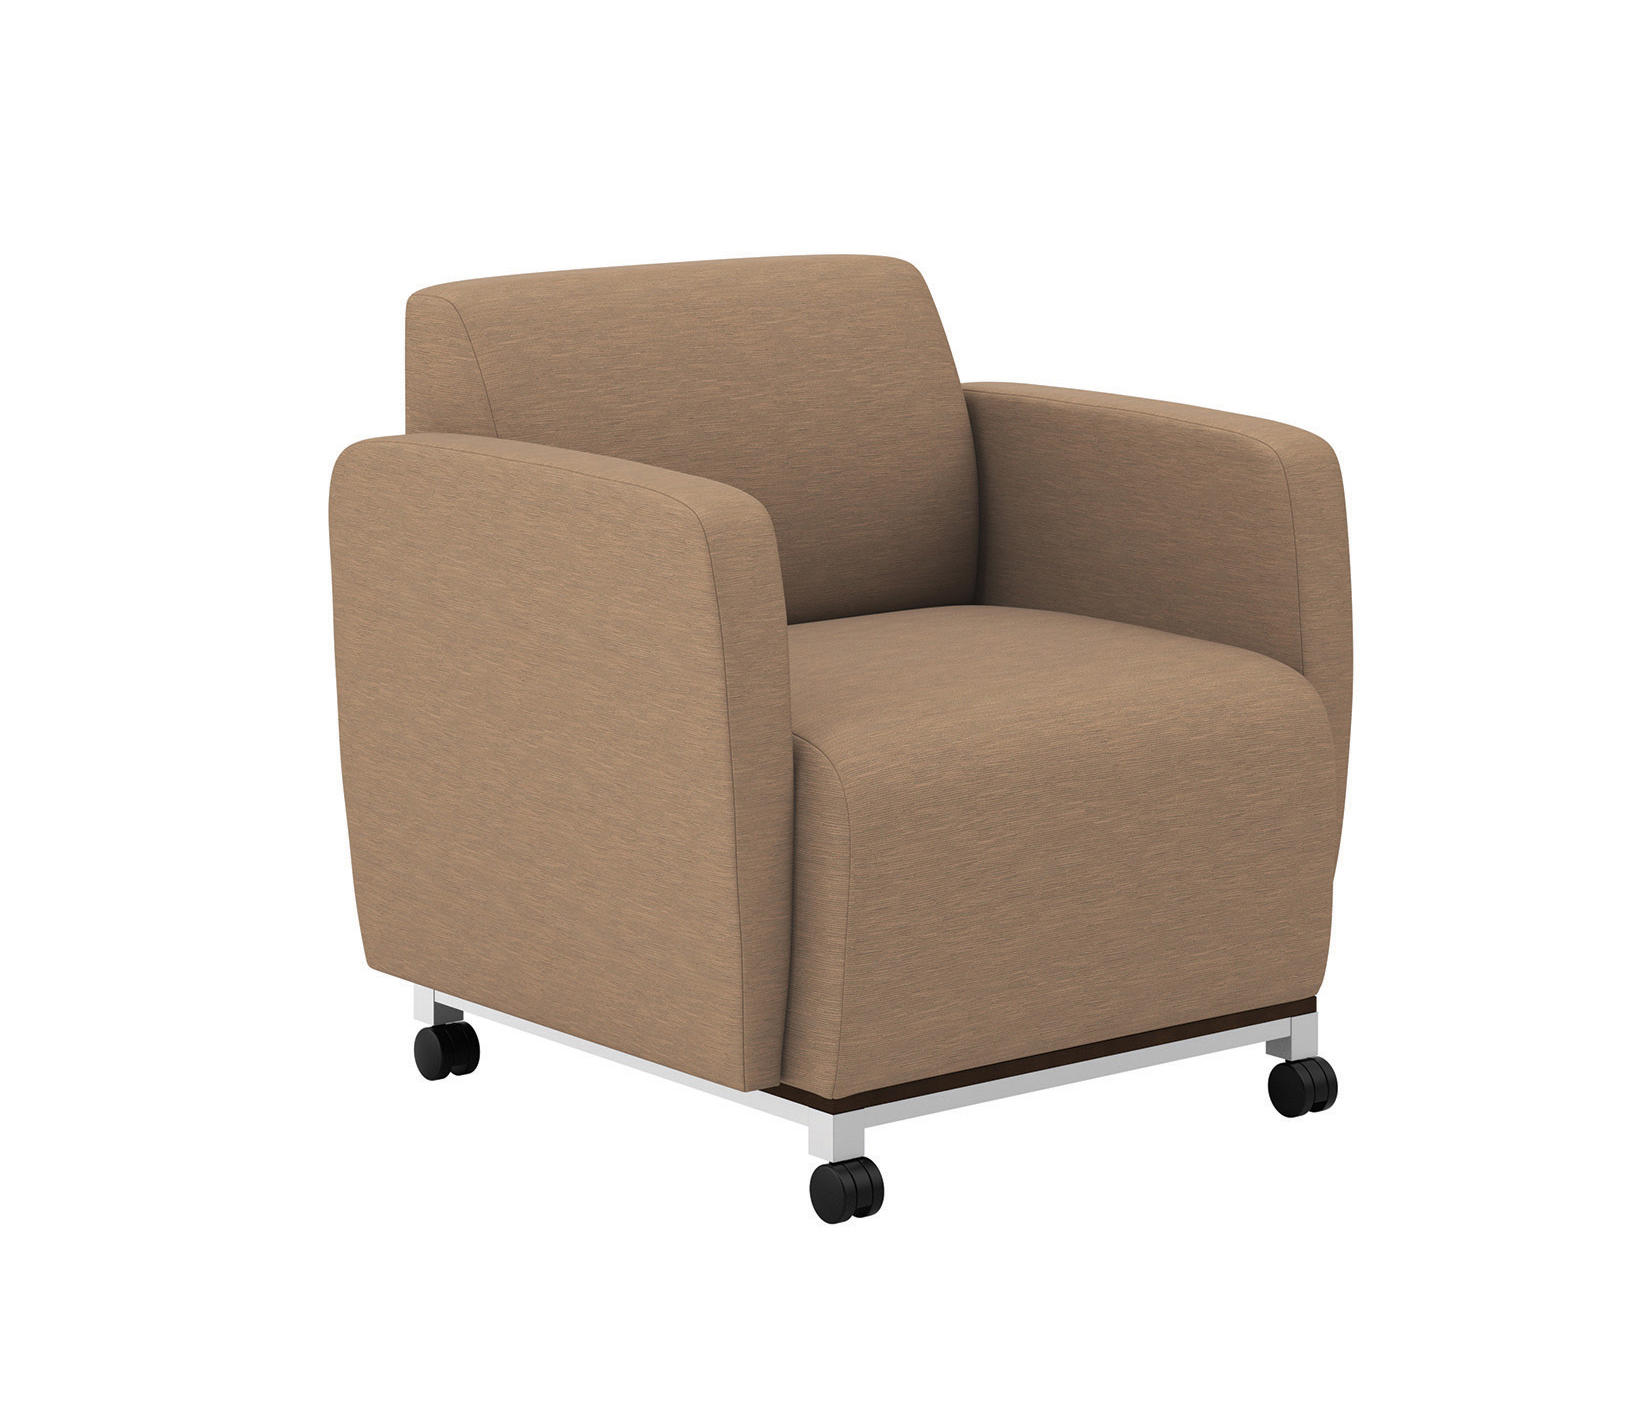 SWIFT SEATING Armchairs From National Office Furniture Architonic